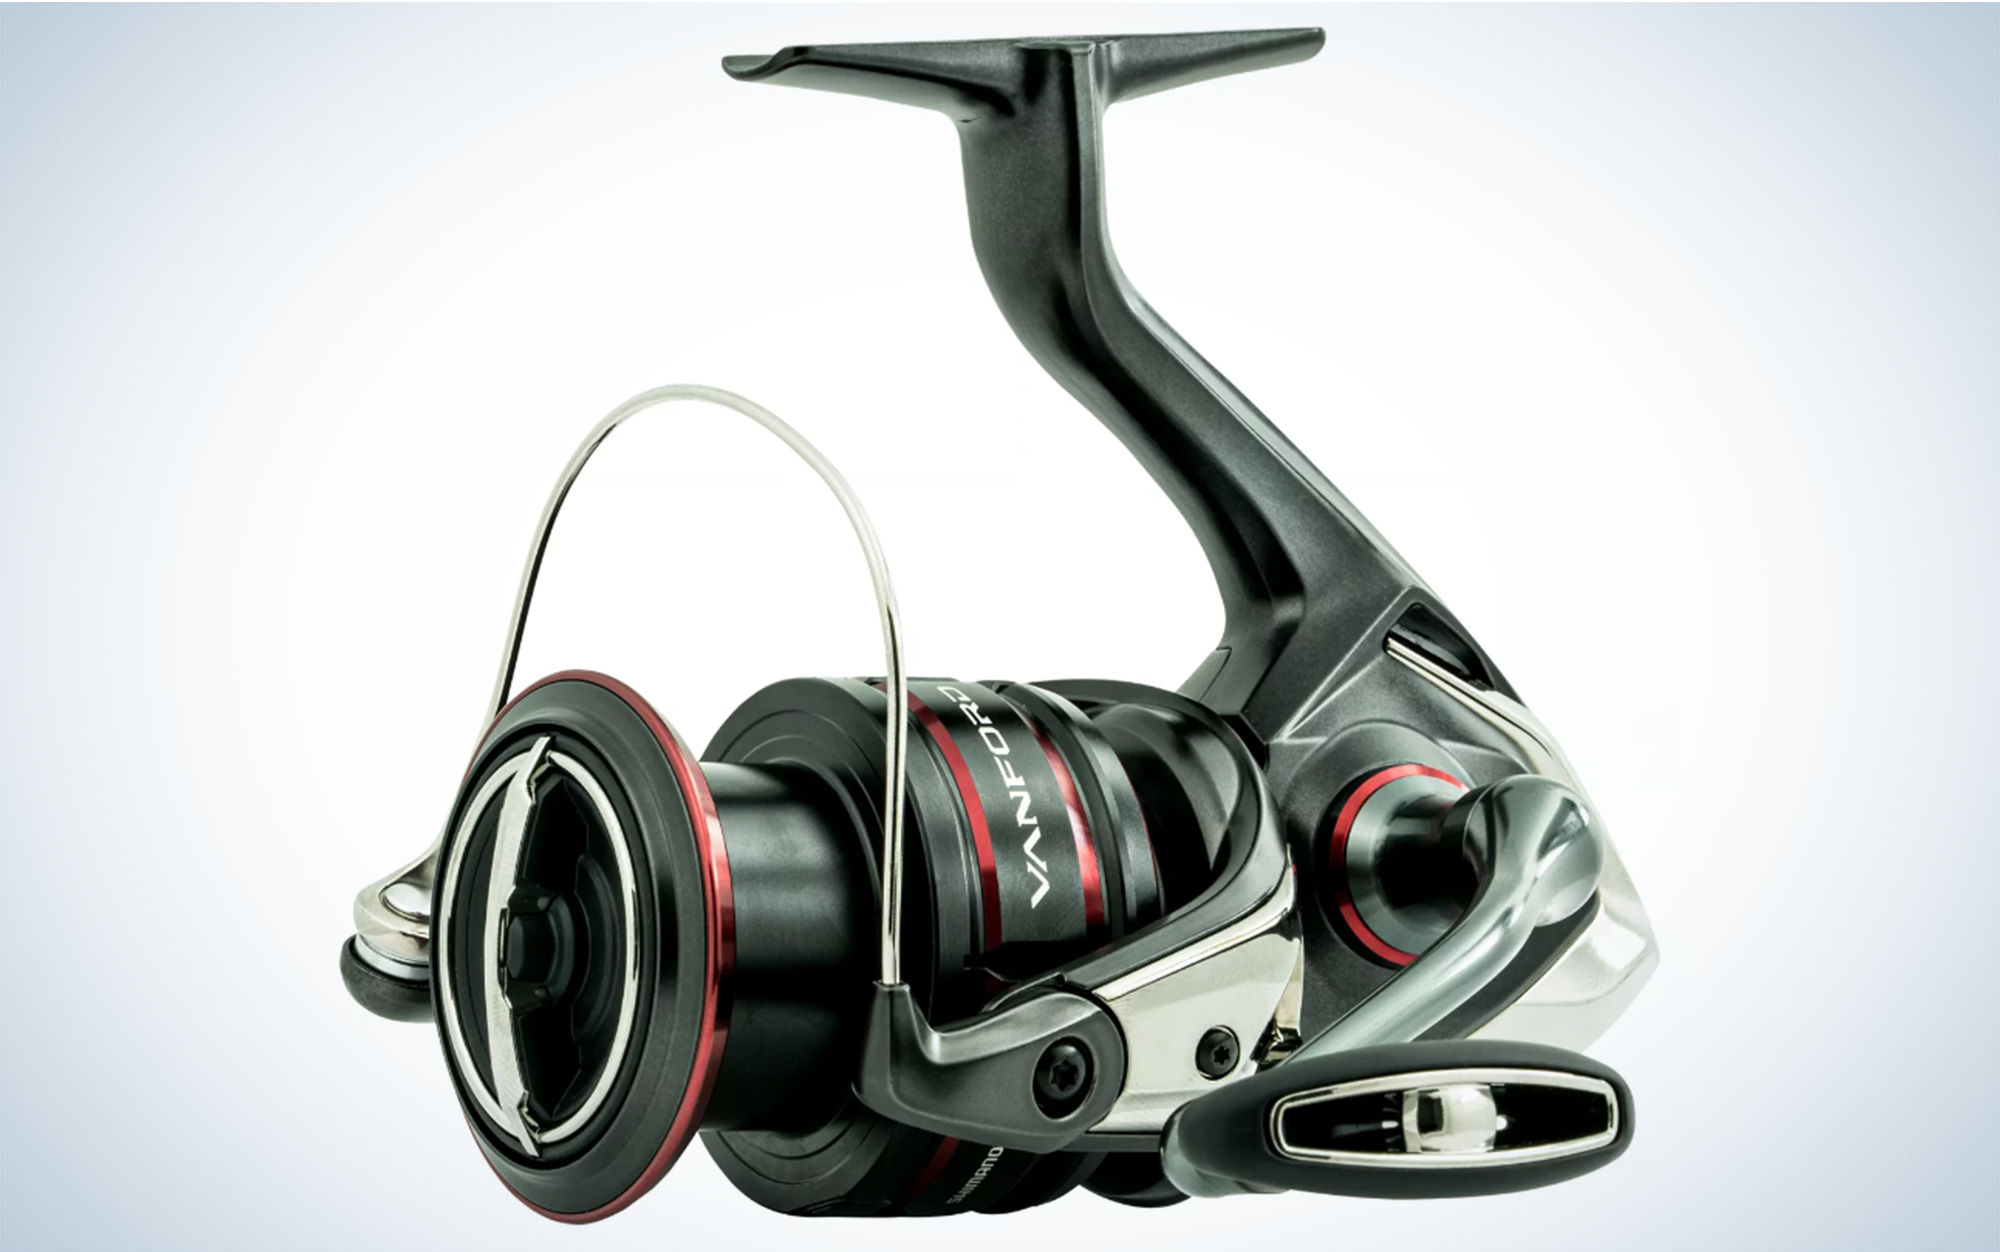 ultra light fishing reel reviews - Today's Deals - Up To 72% Off